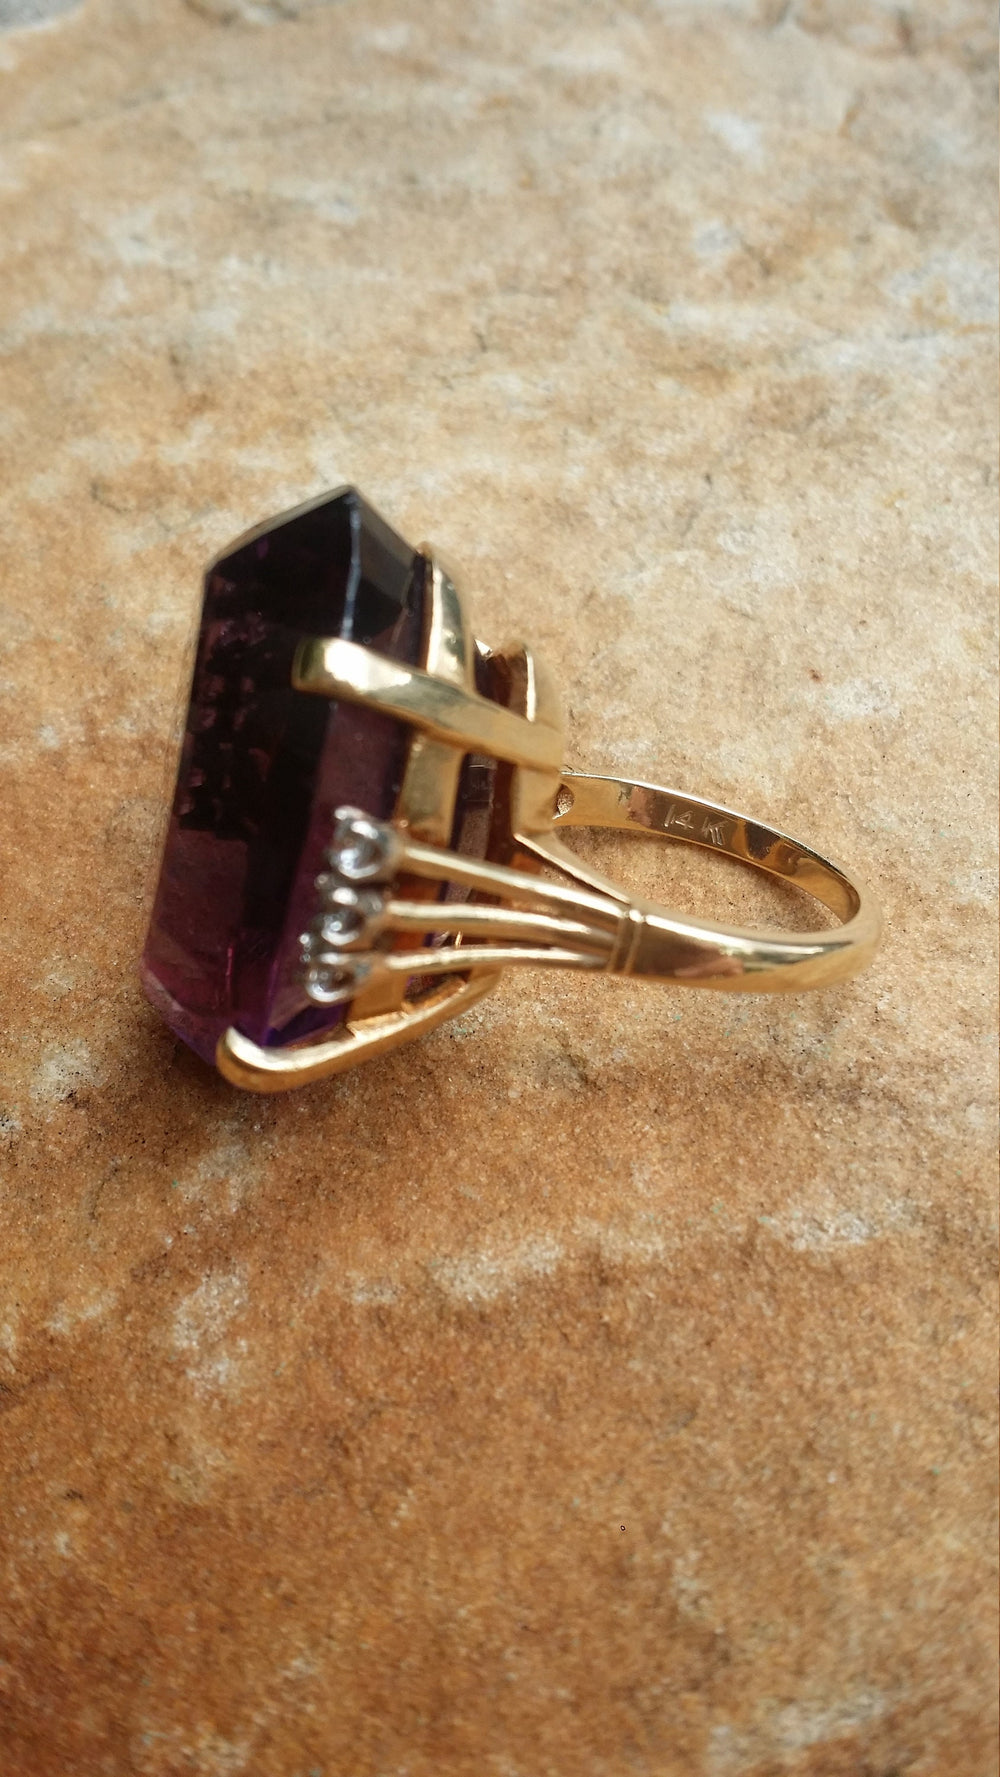 Amethyst Cocktail Ring with Diamonds / Large Amethyst Retro Ring / Statement Amethyst Ring with diamonds